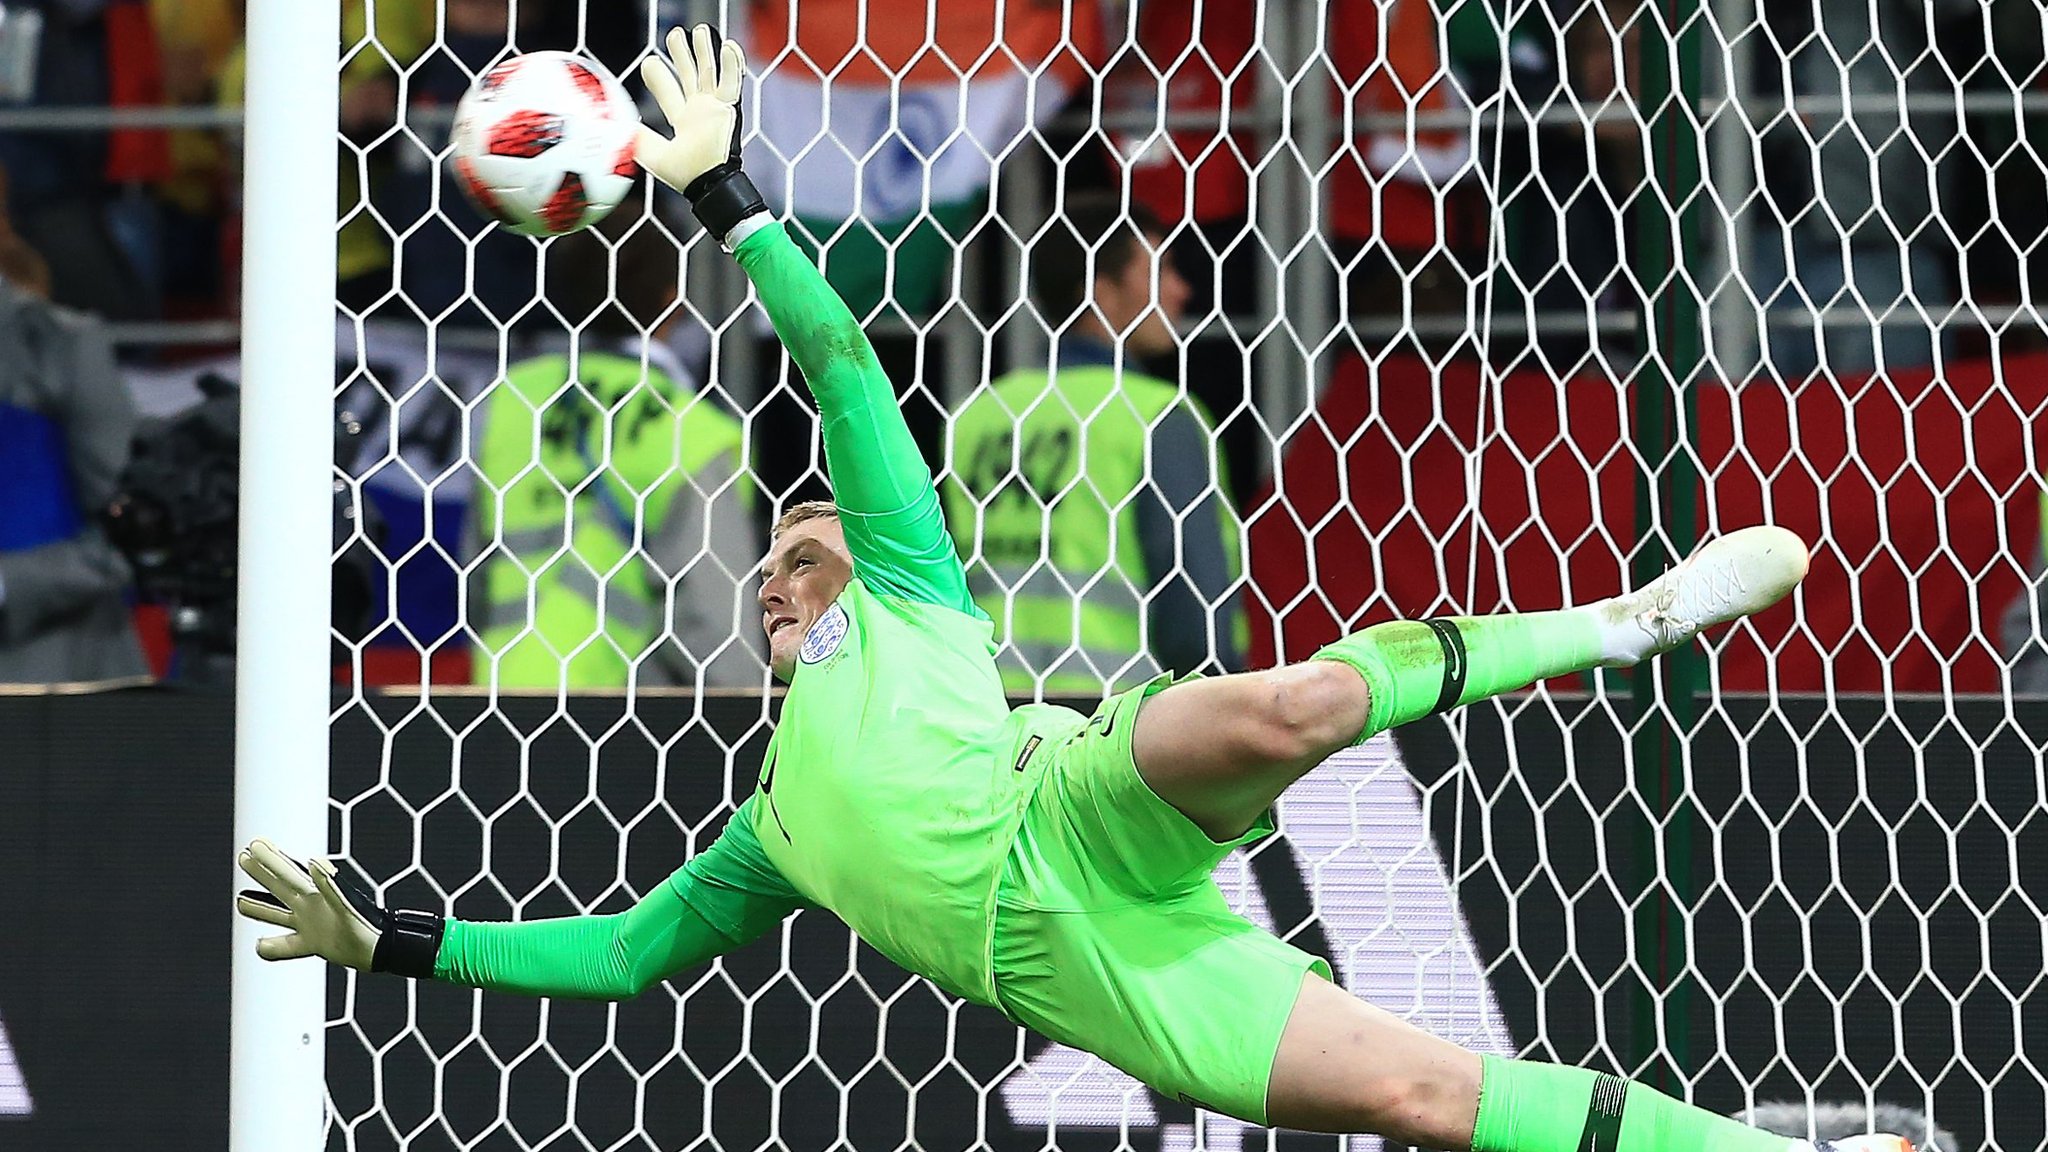 Watch: Pickford saves, Dier scores - England win penalty shootout